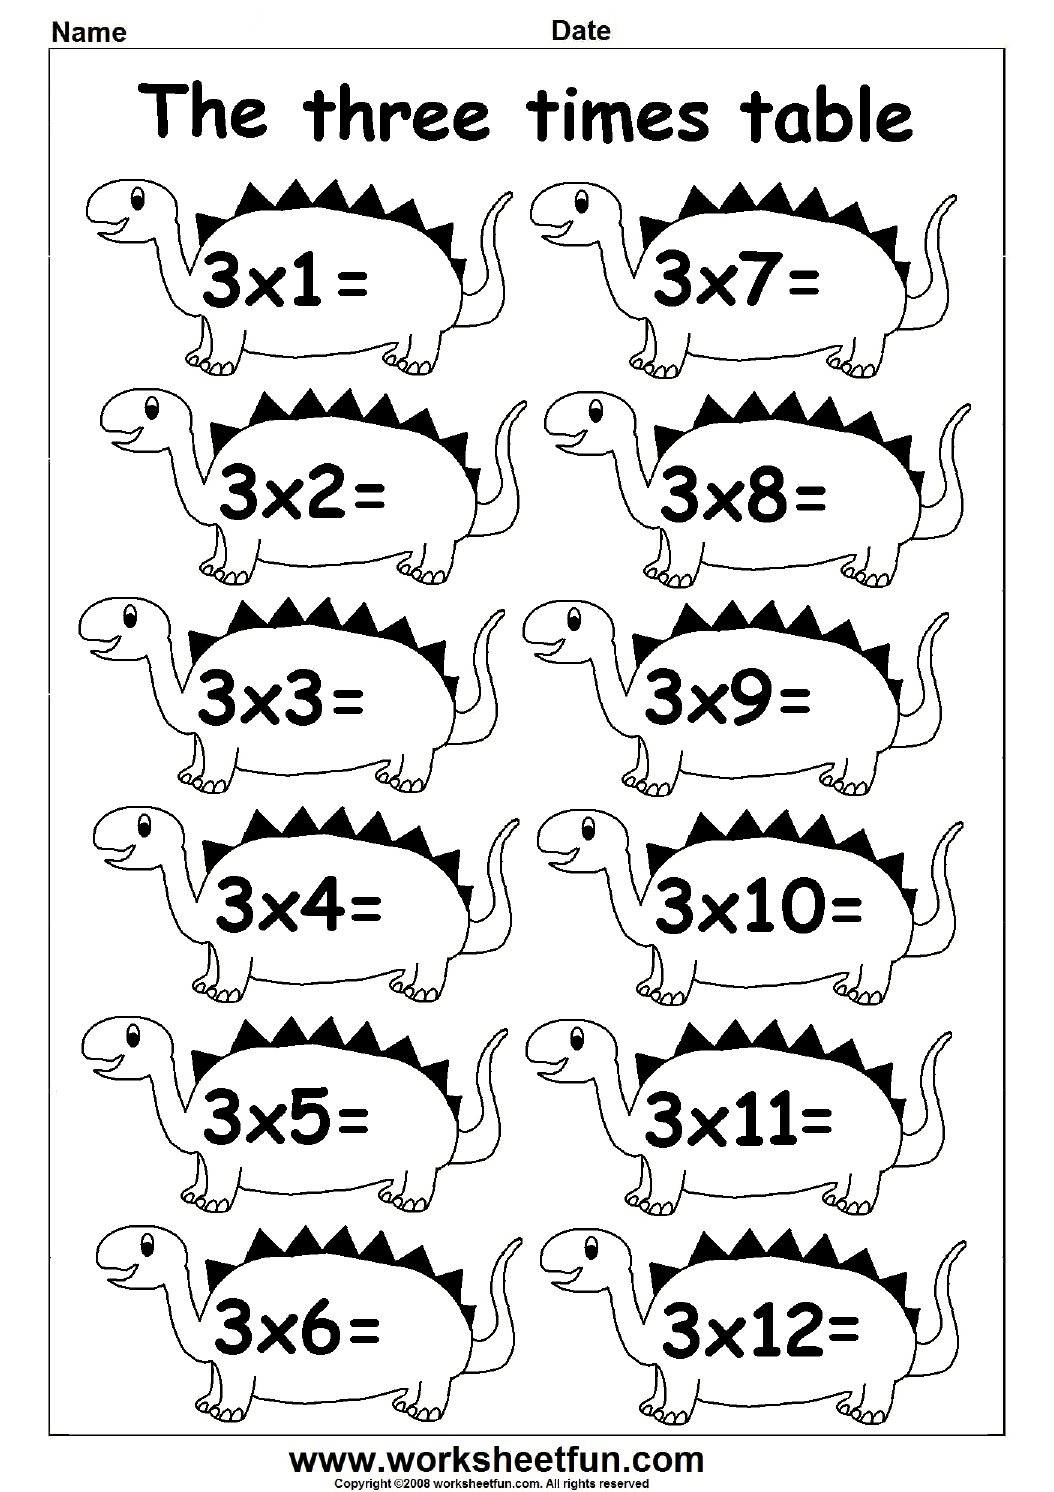 Multiplication Times Tables Worksheets – 21, 21, 21 & 21 Times Tables With Regard To 3 Times Table Worksheet